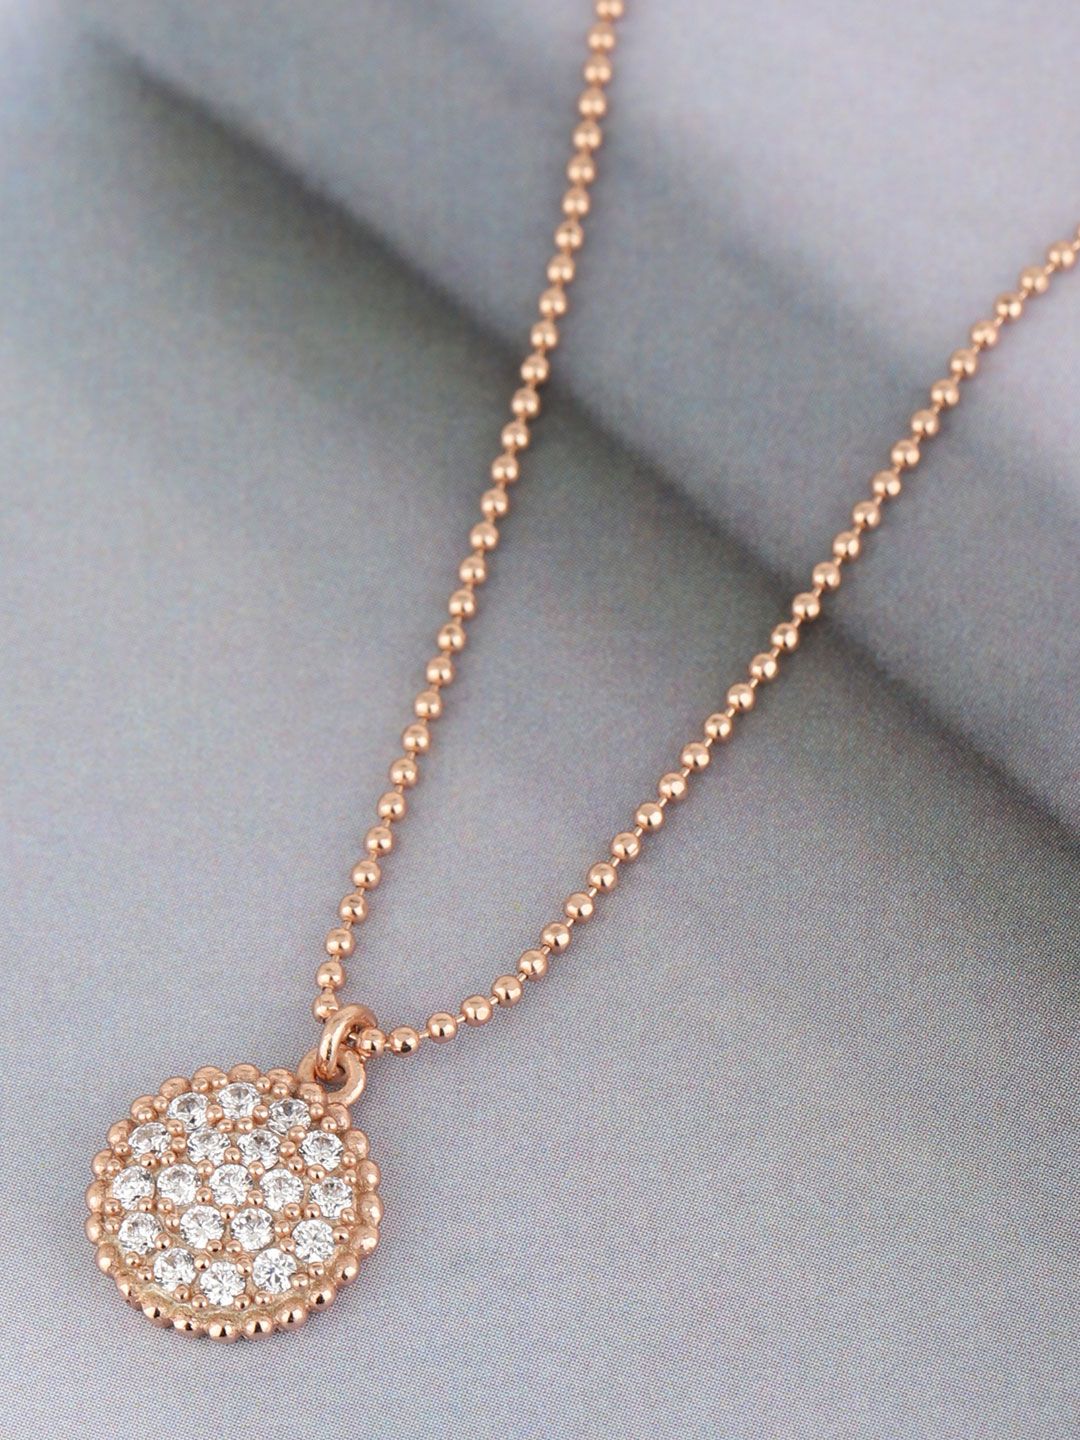 Carlton London Rose Gold-Plated CZ-Studded Necklace Price in India